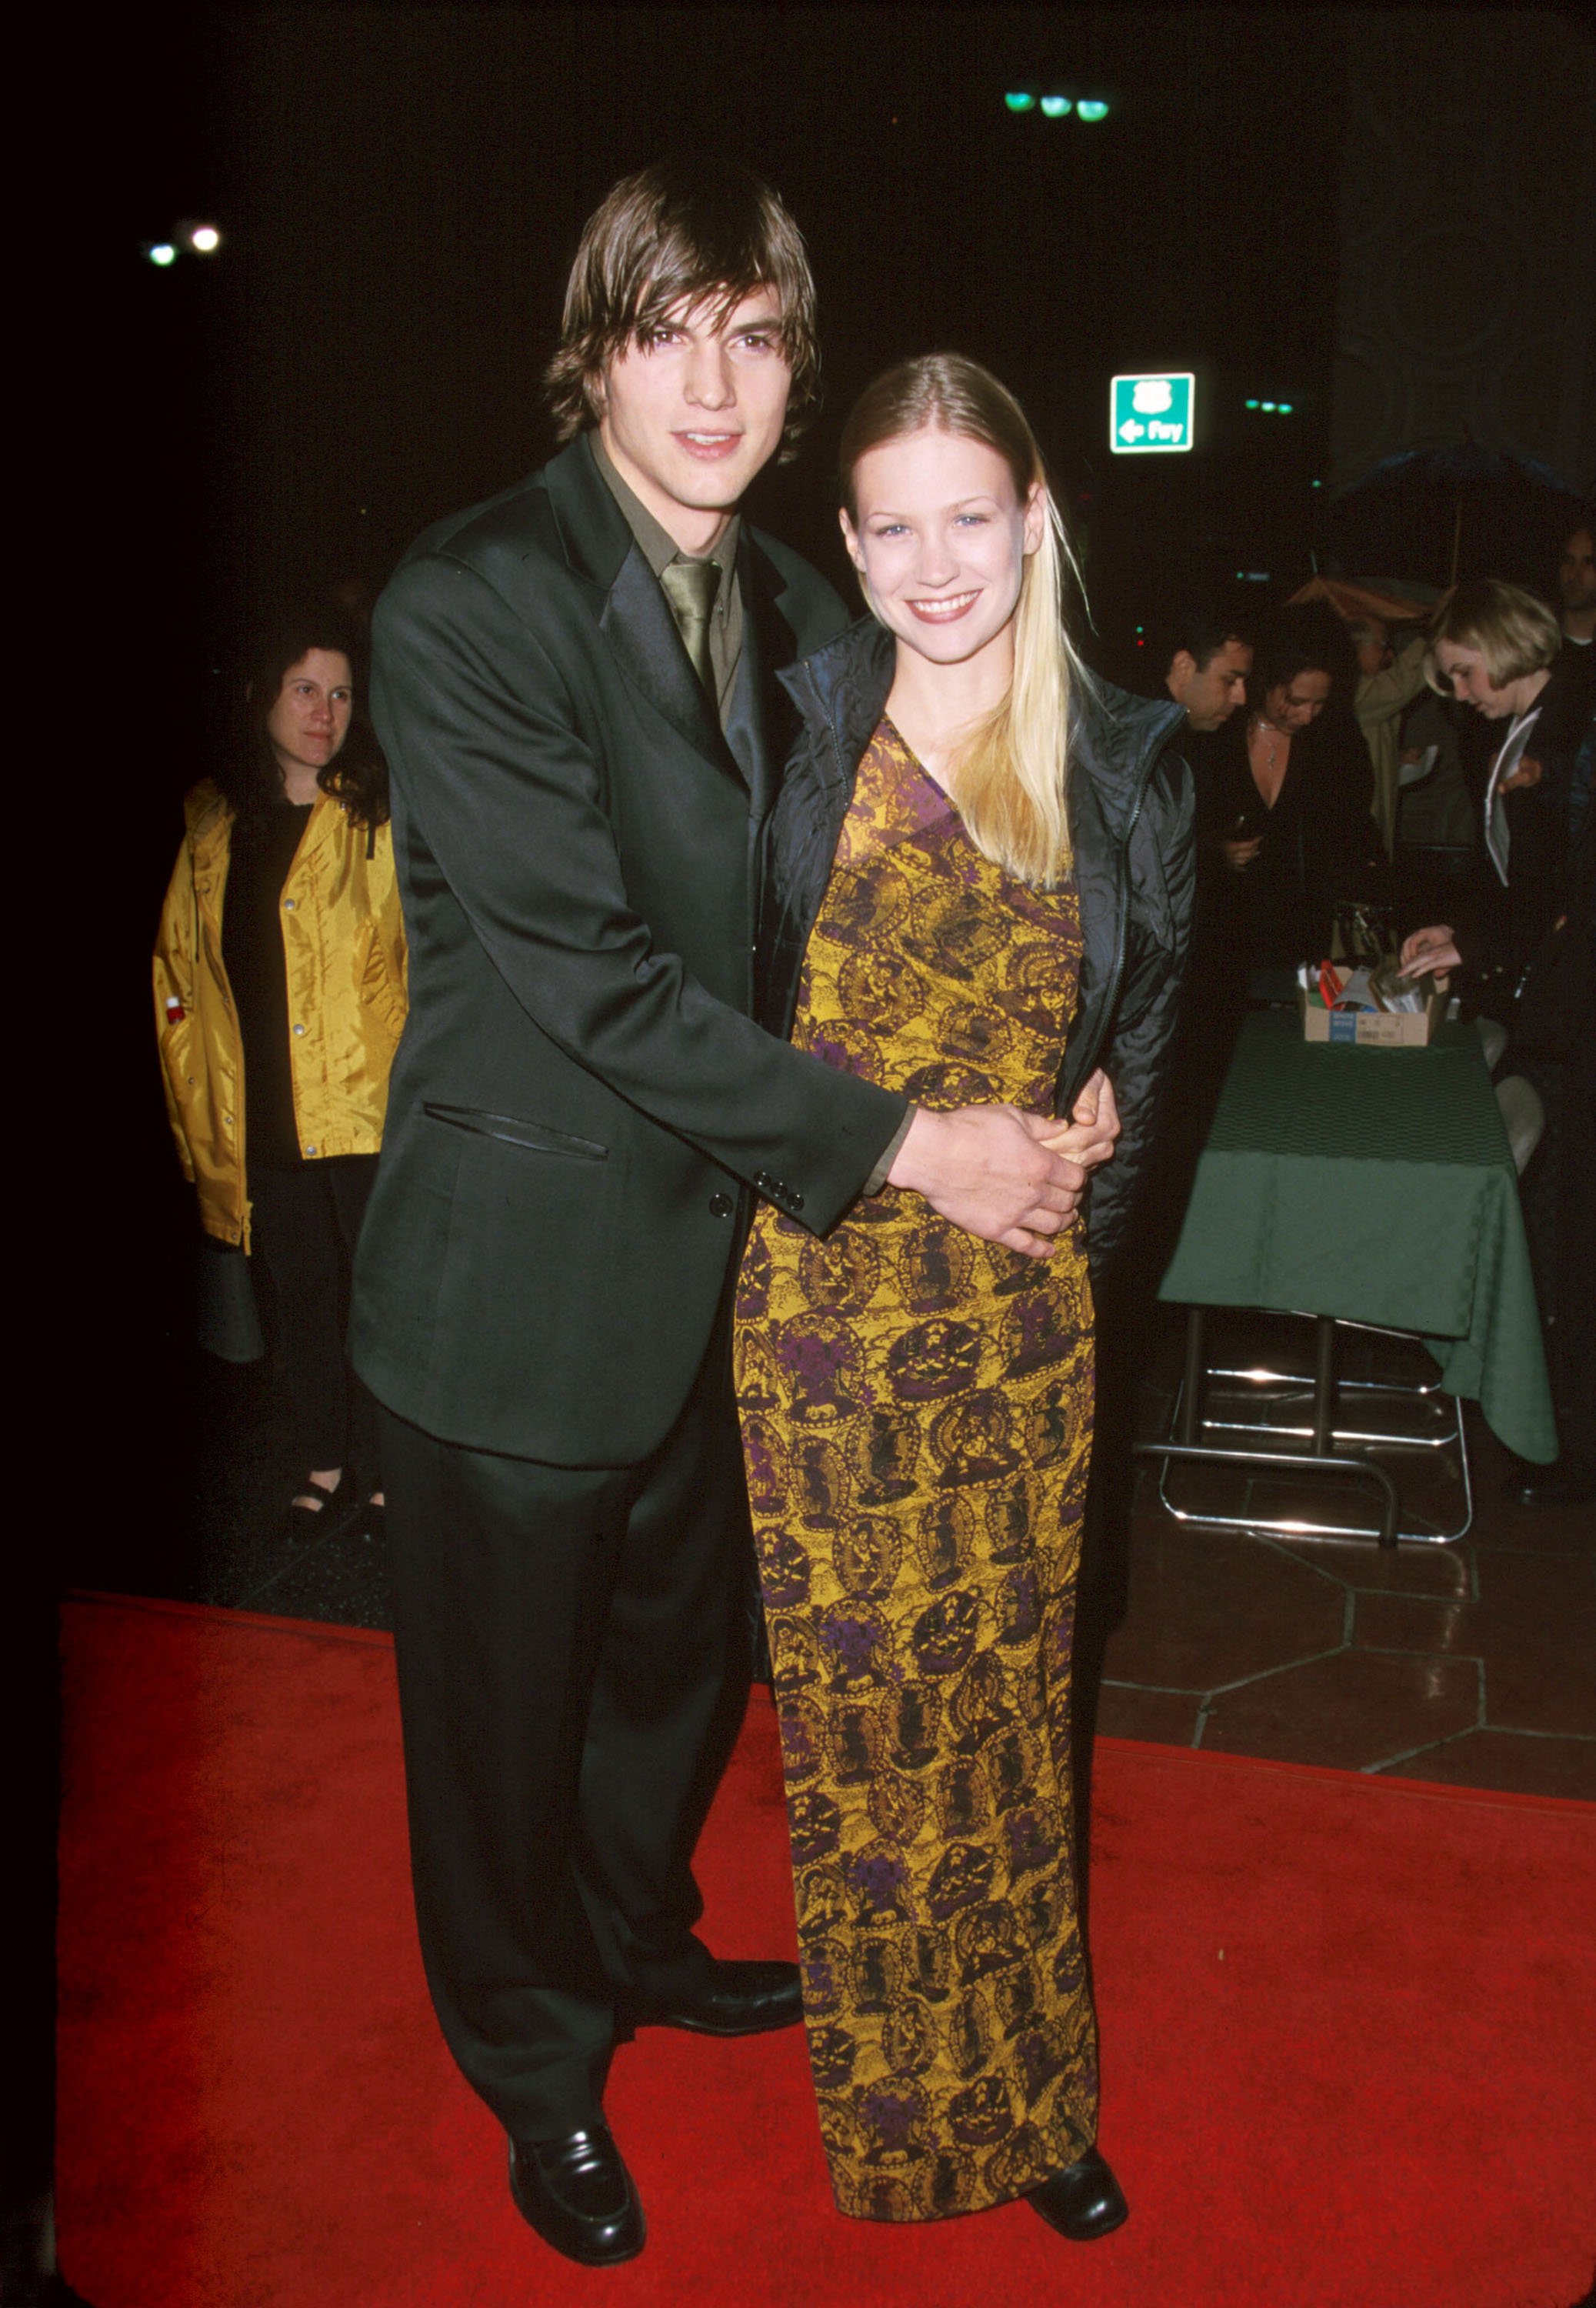 Ashton Kutcher and January Jones at the premiere of "Reindeer Games" in California | Source: Getty Images